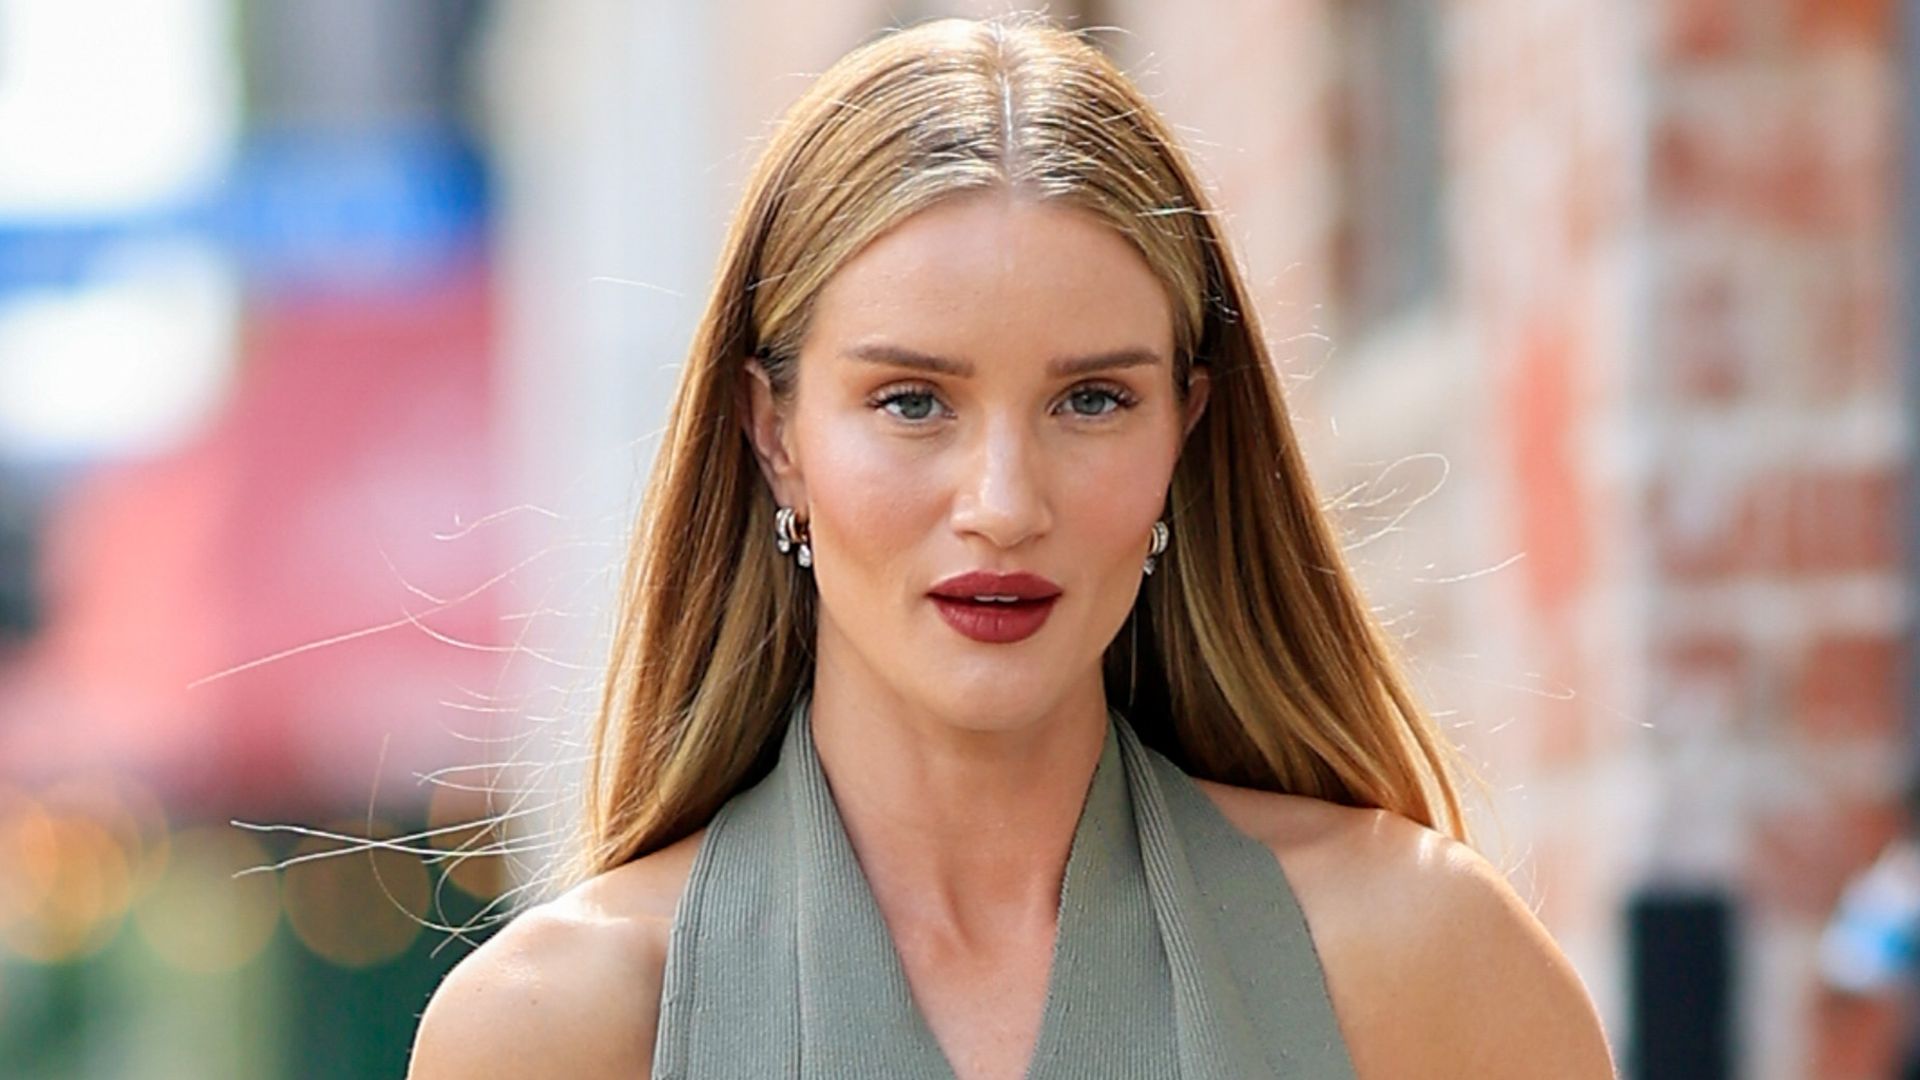 LOS ANGELES, CA - JUNE 12: Rosie Huntington-Whiteley is seen on June 12, 2023 in Los Angeles, California.  (Photo by Rachpoot/Bauer-Griffin/GC Images)